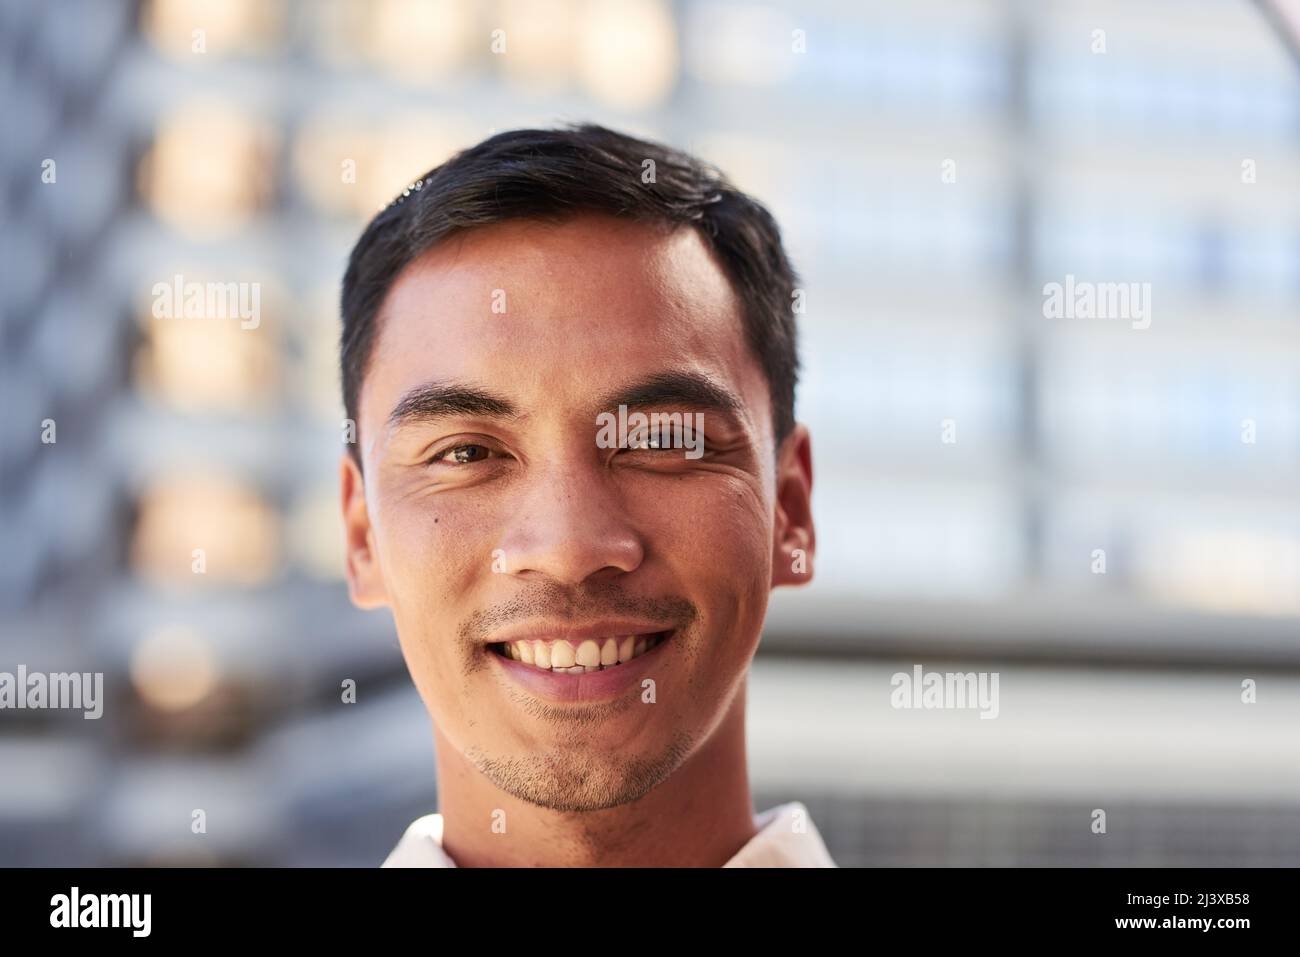 An attractive South East Asian man smiles for a portrait outside city building Stock Photo